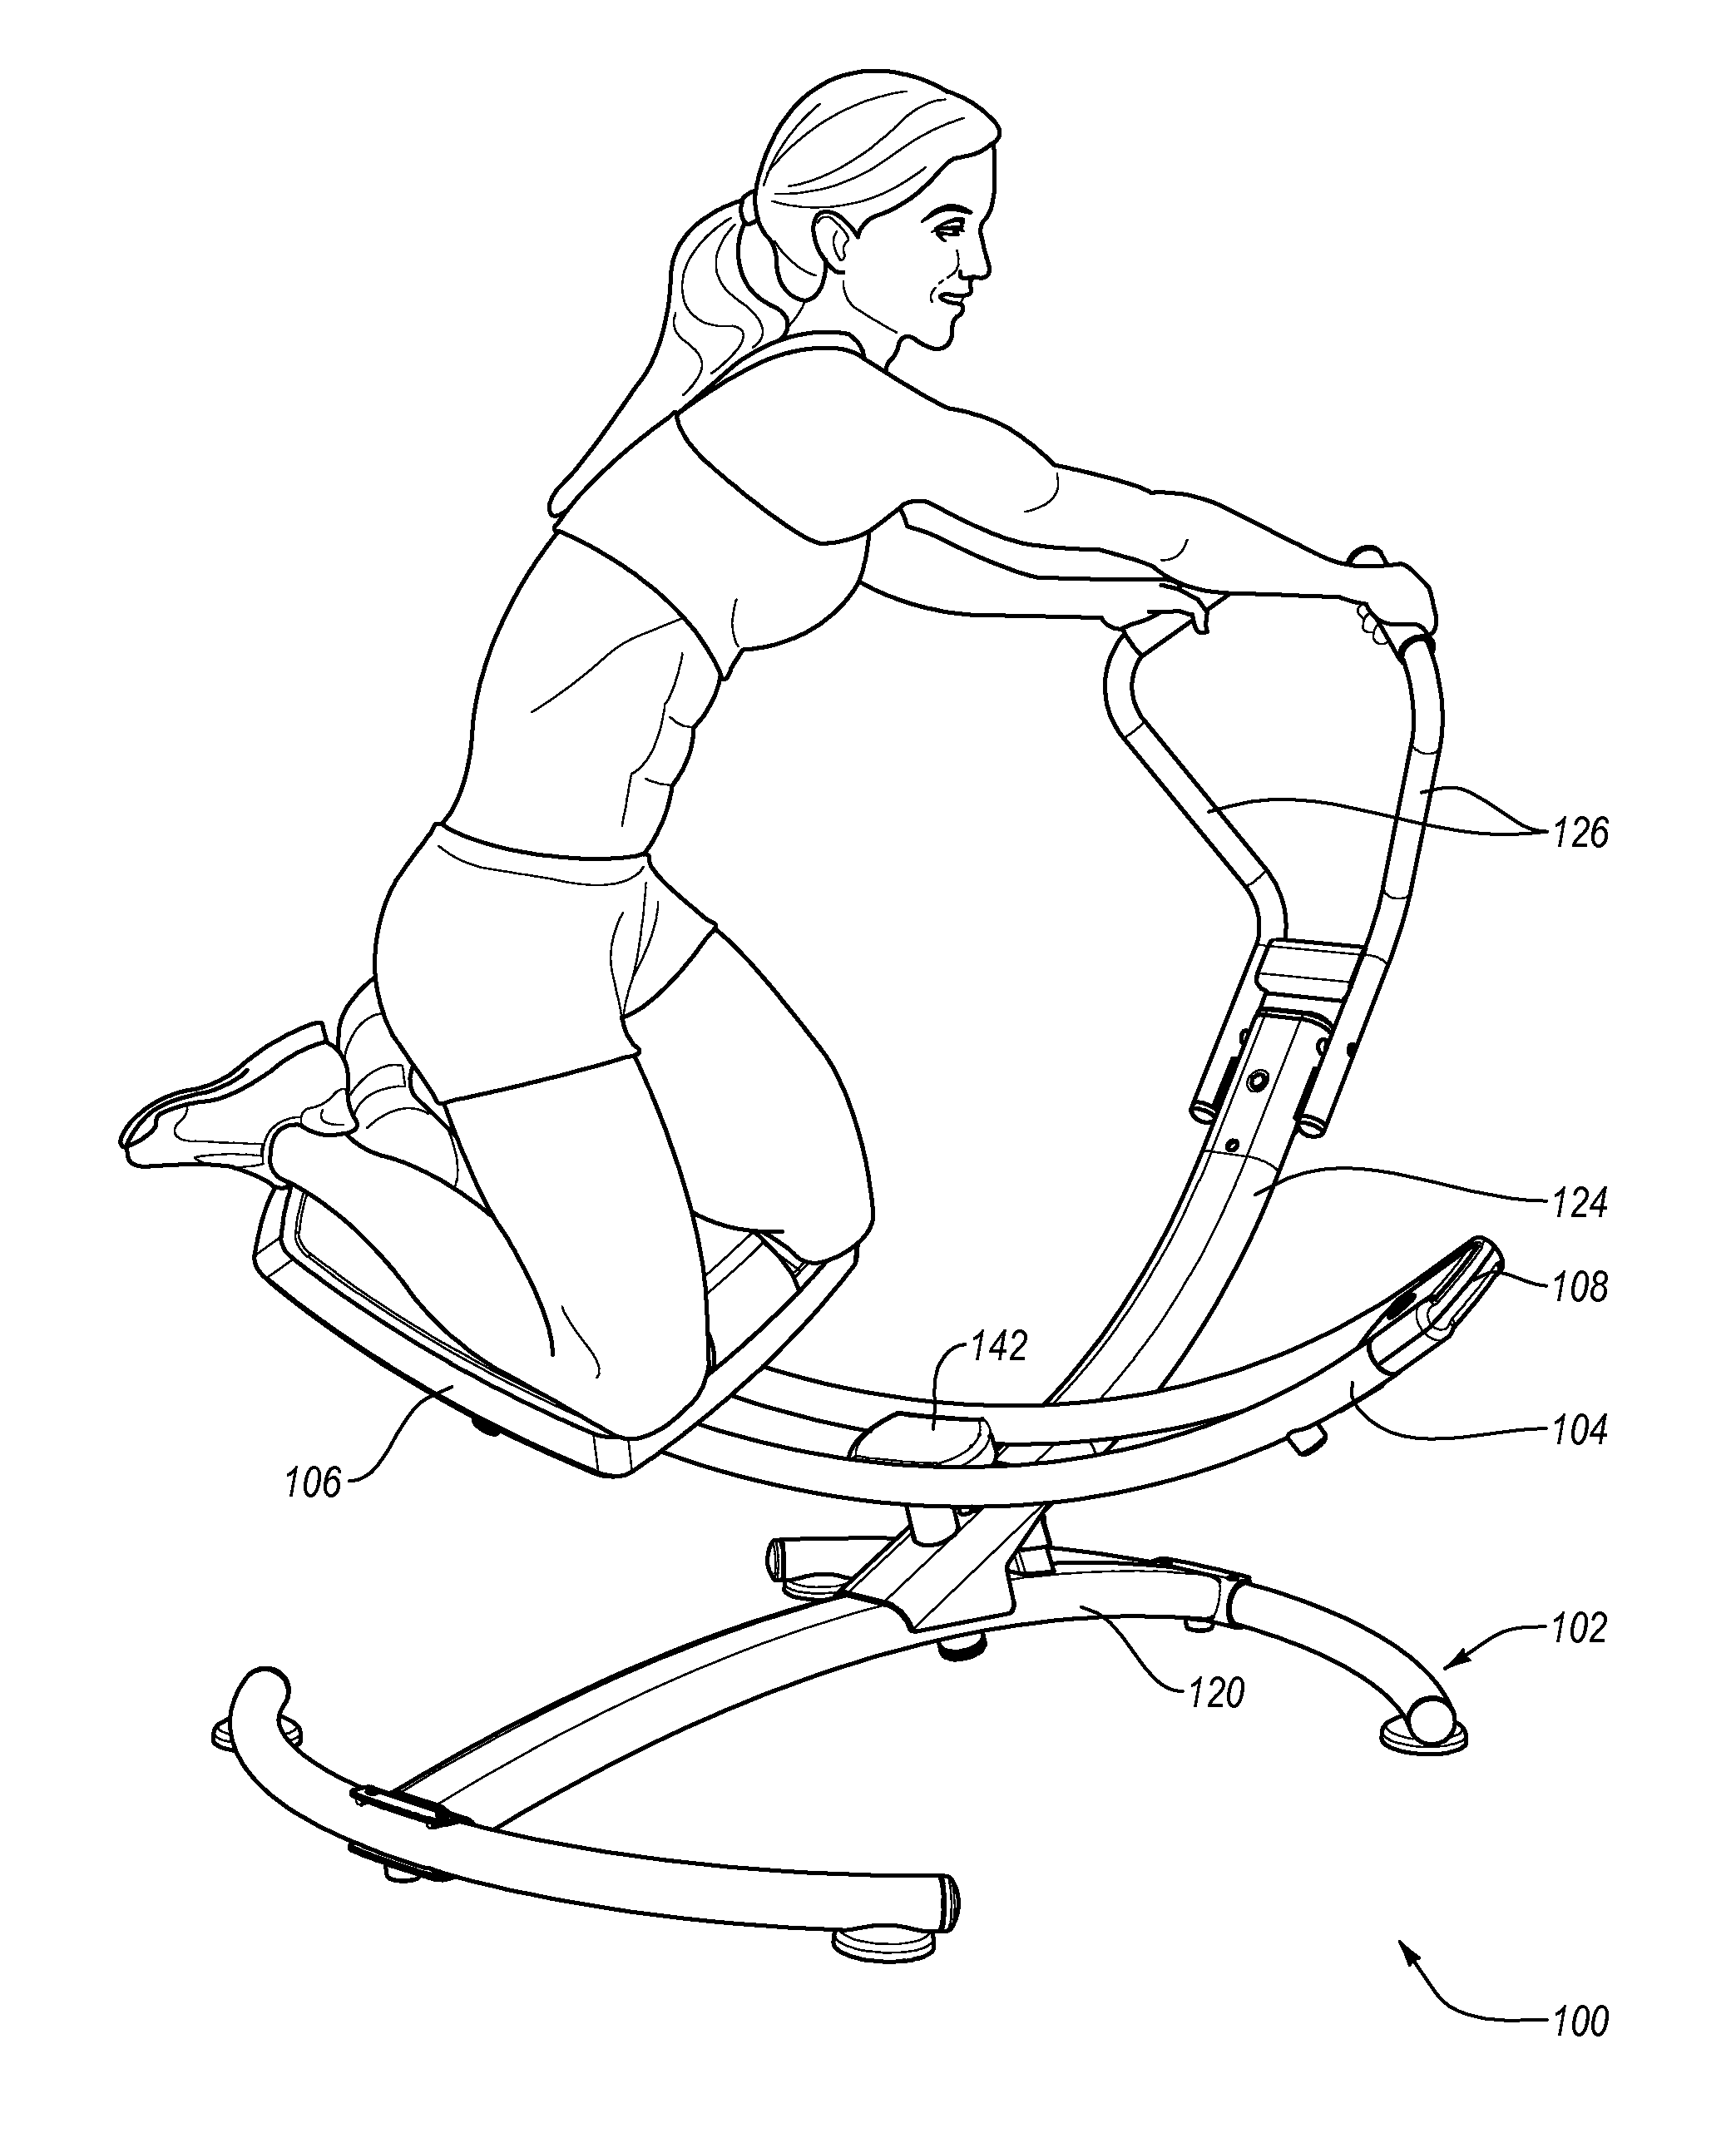 System and method for exercising